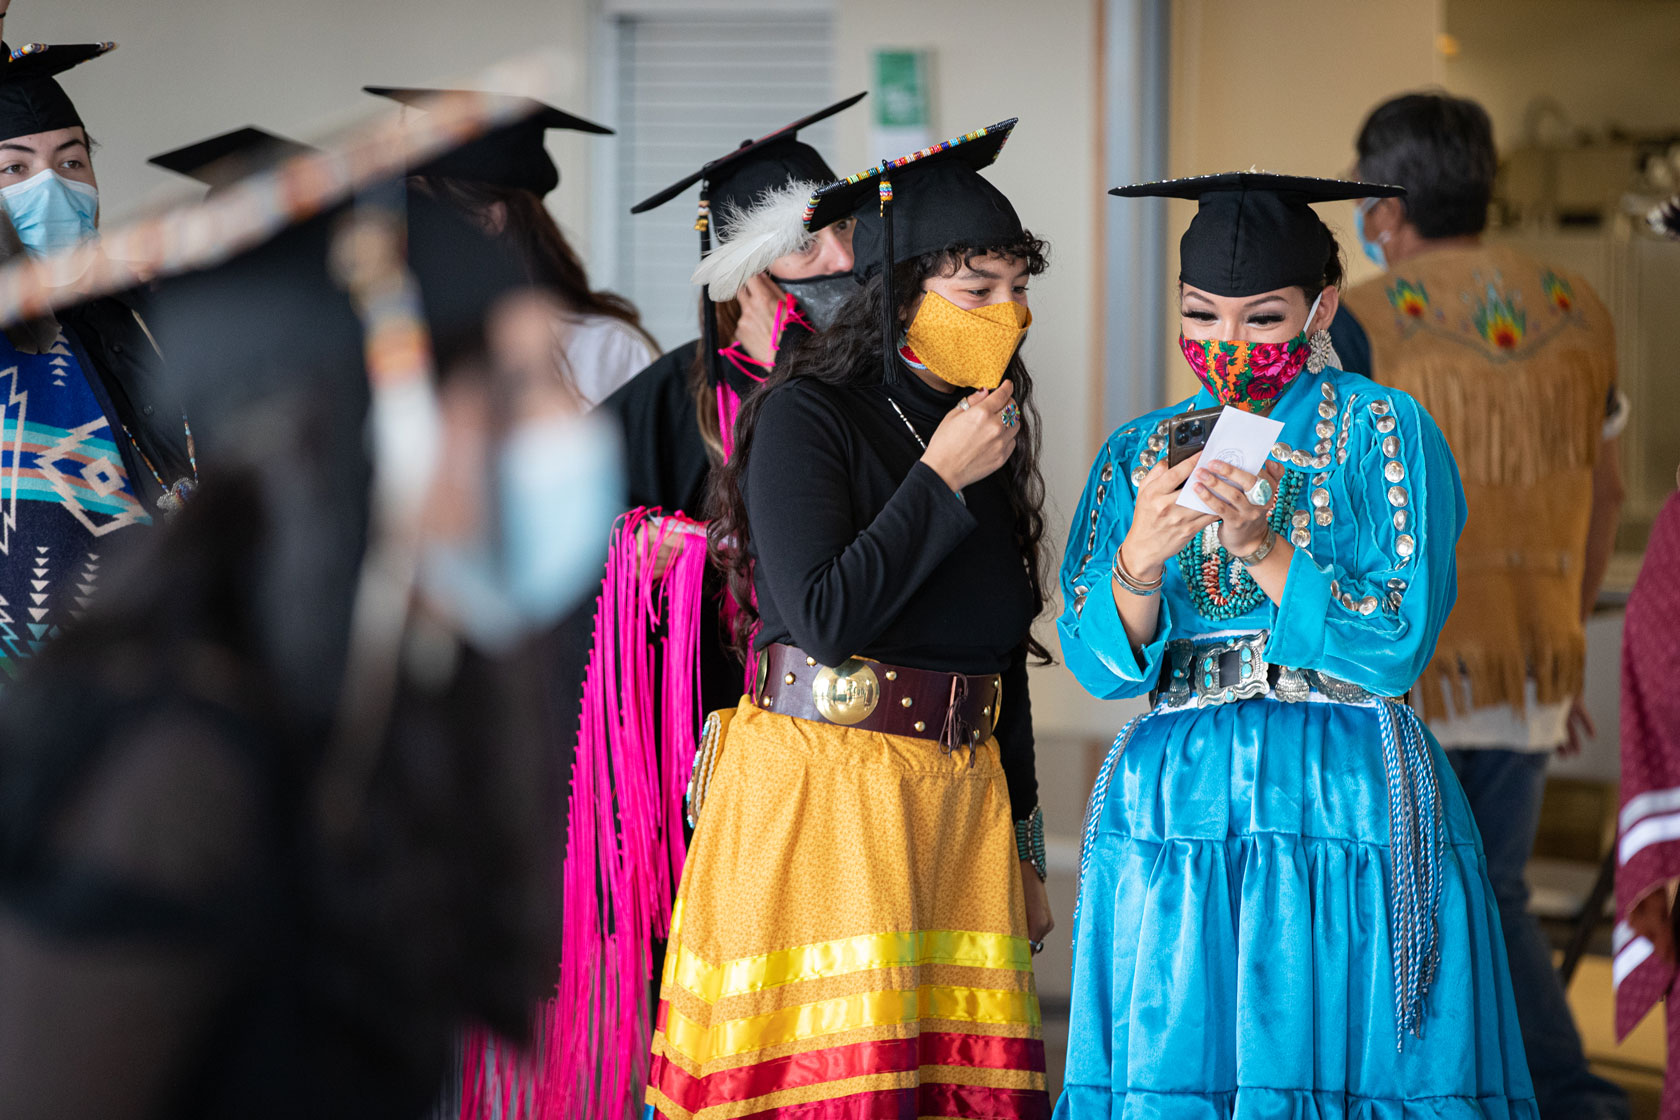 A group of SKC students prepare for their graduation ceremony.